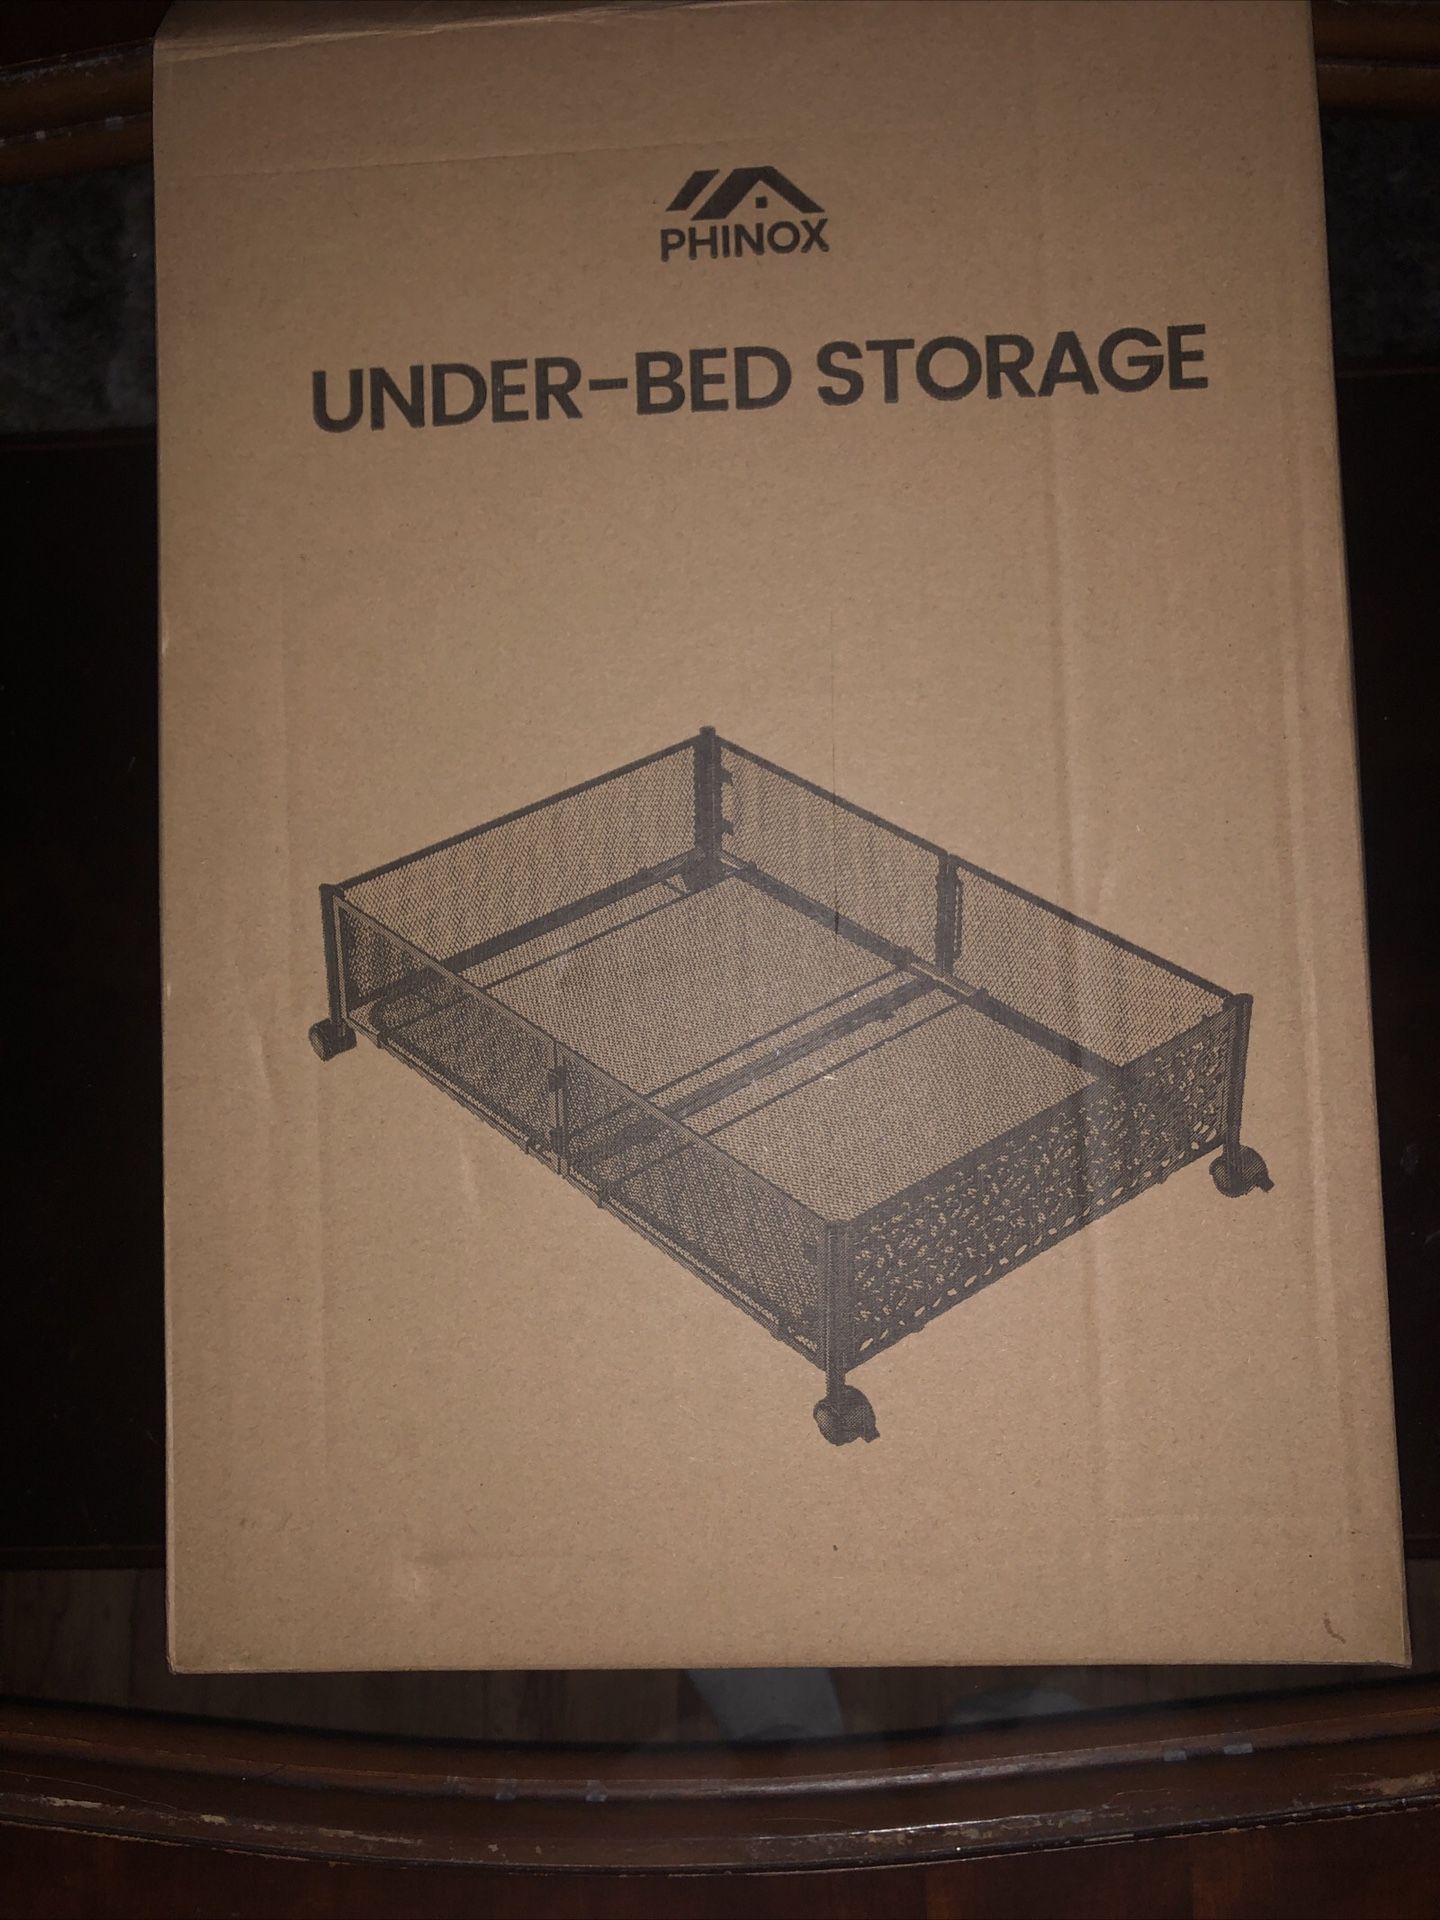 Under Bed Storage Under the Bed Storage Containers with Wheels Under Bed Shoe...